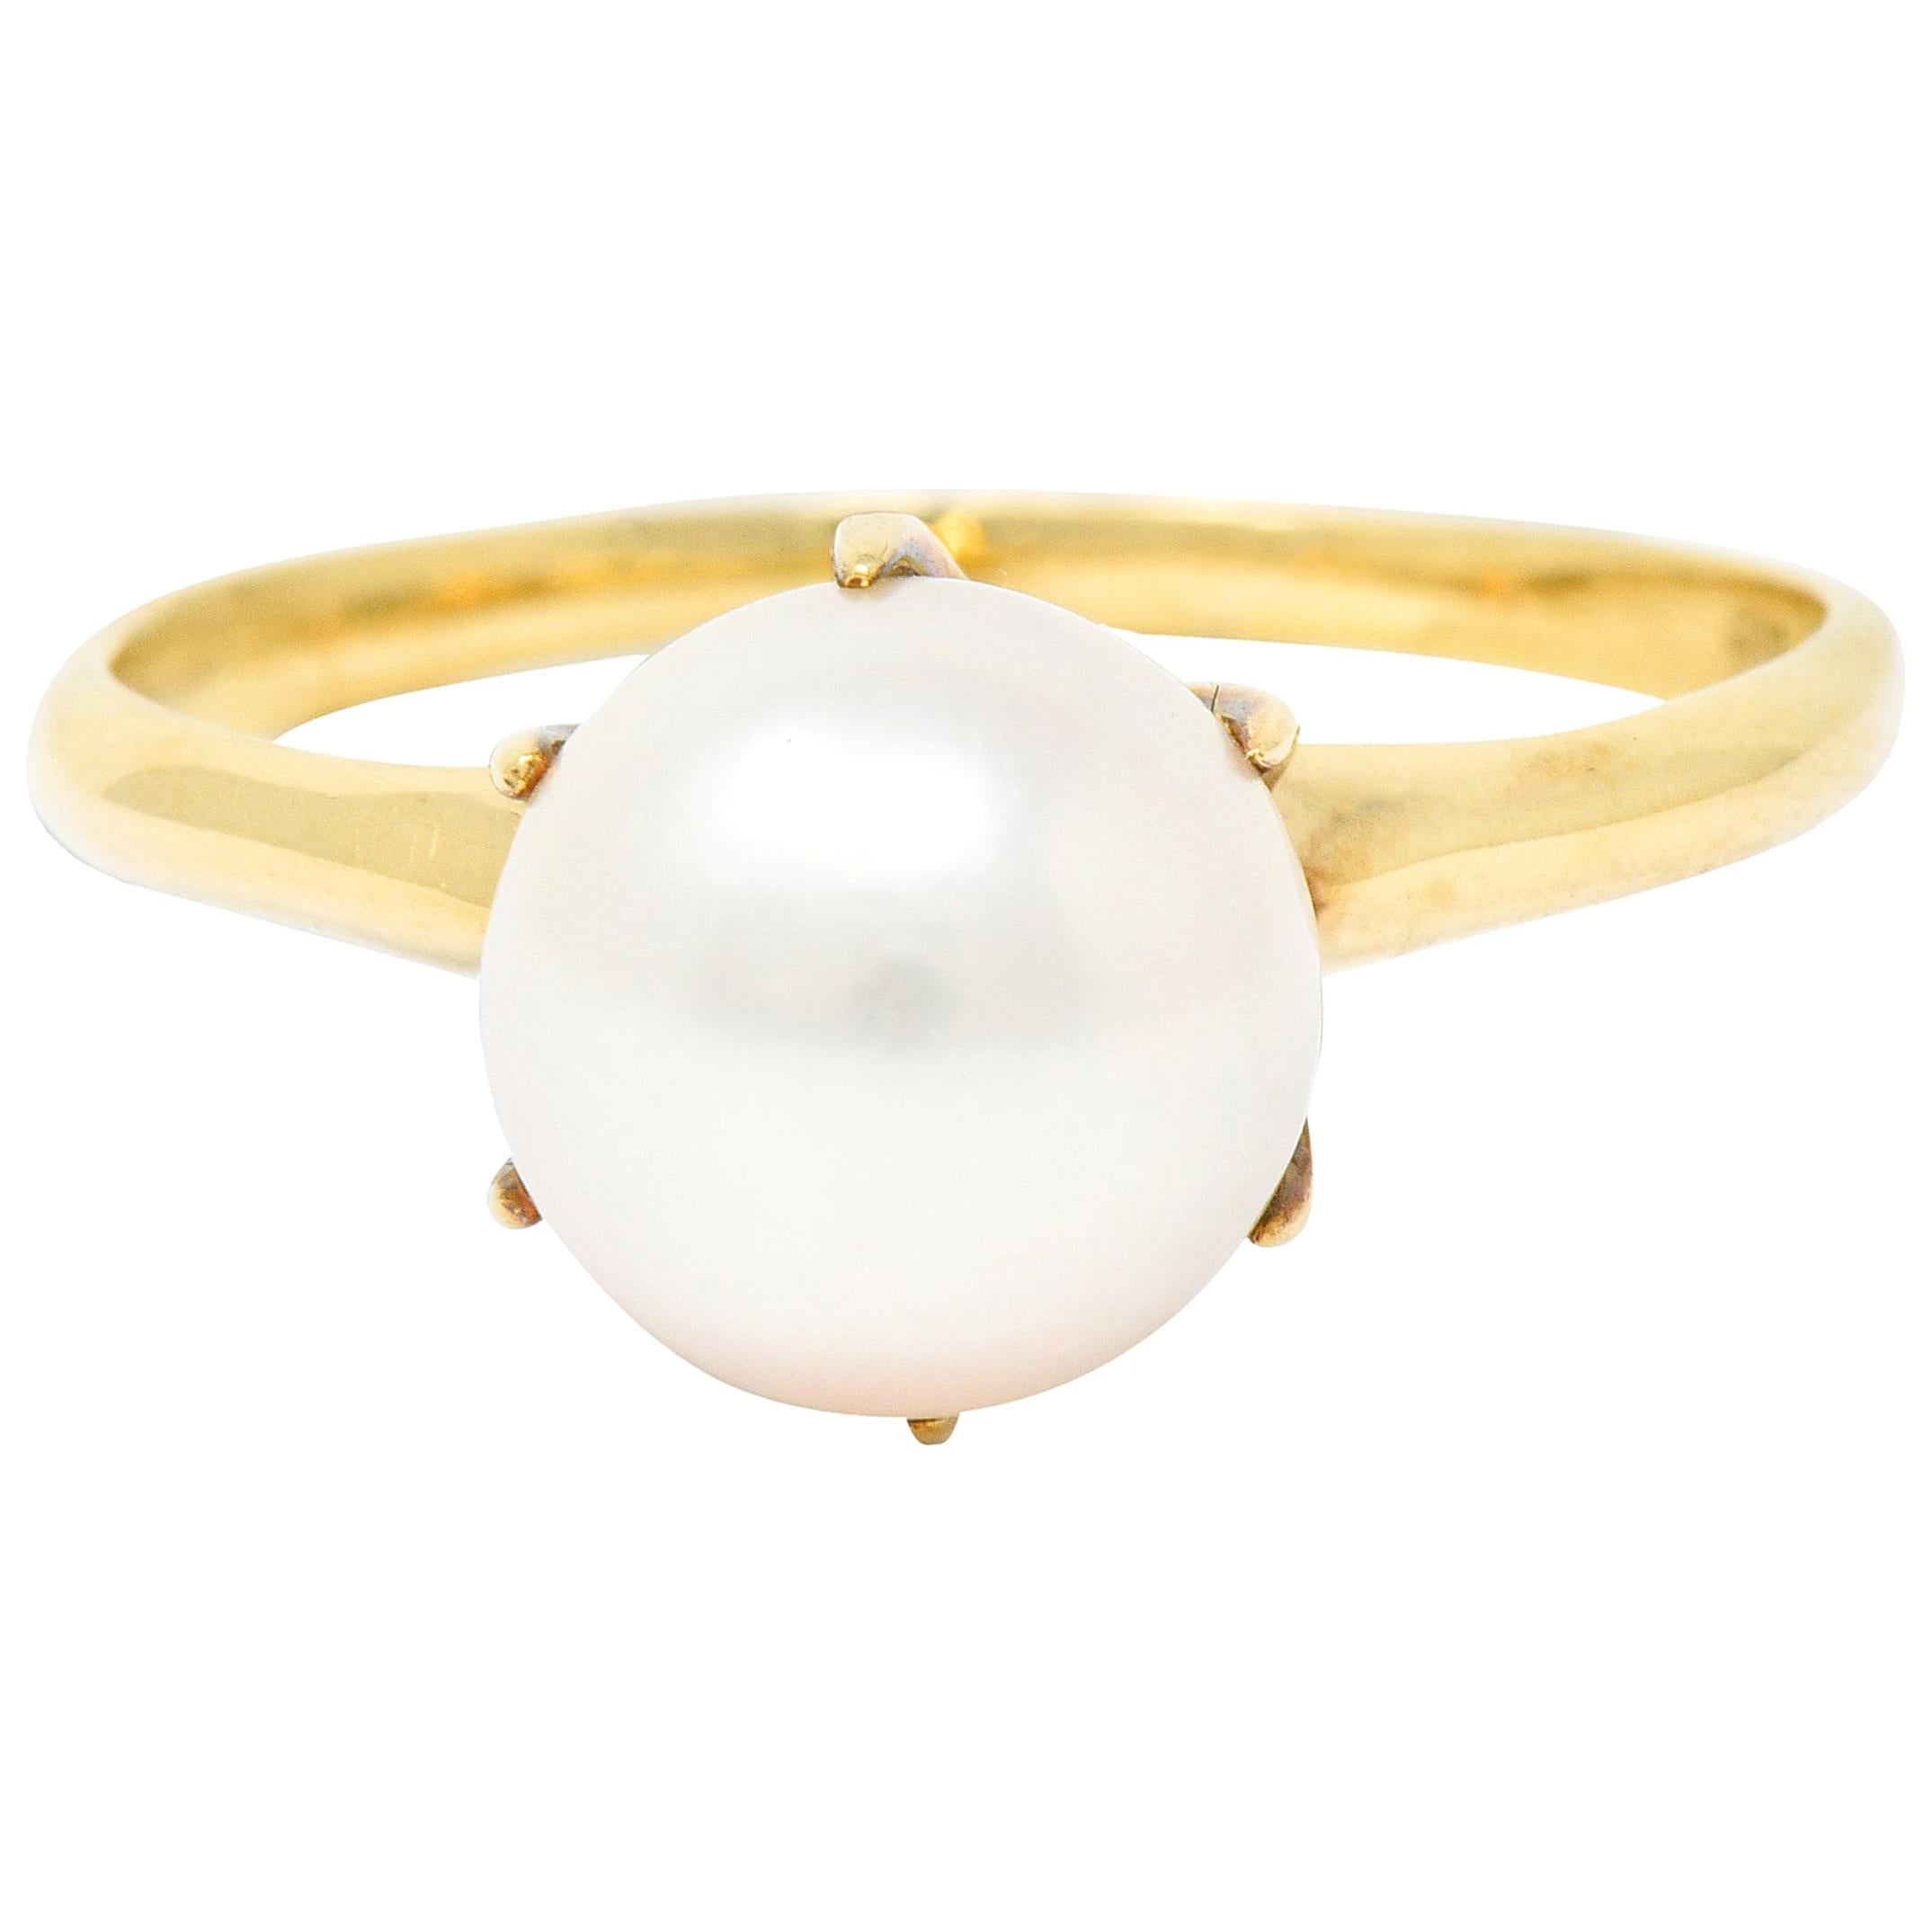 Mikimoto Vintage Cultured Pearl 14 Karat Gold Solitaire Ring